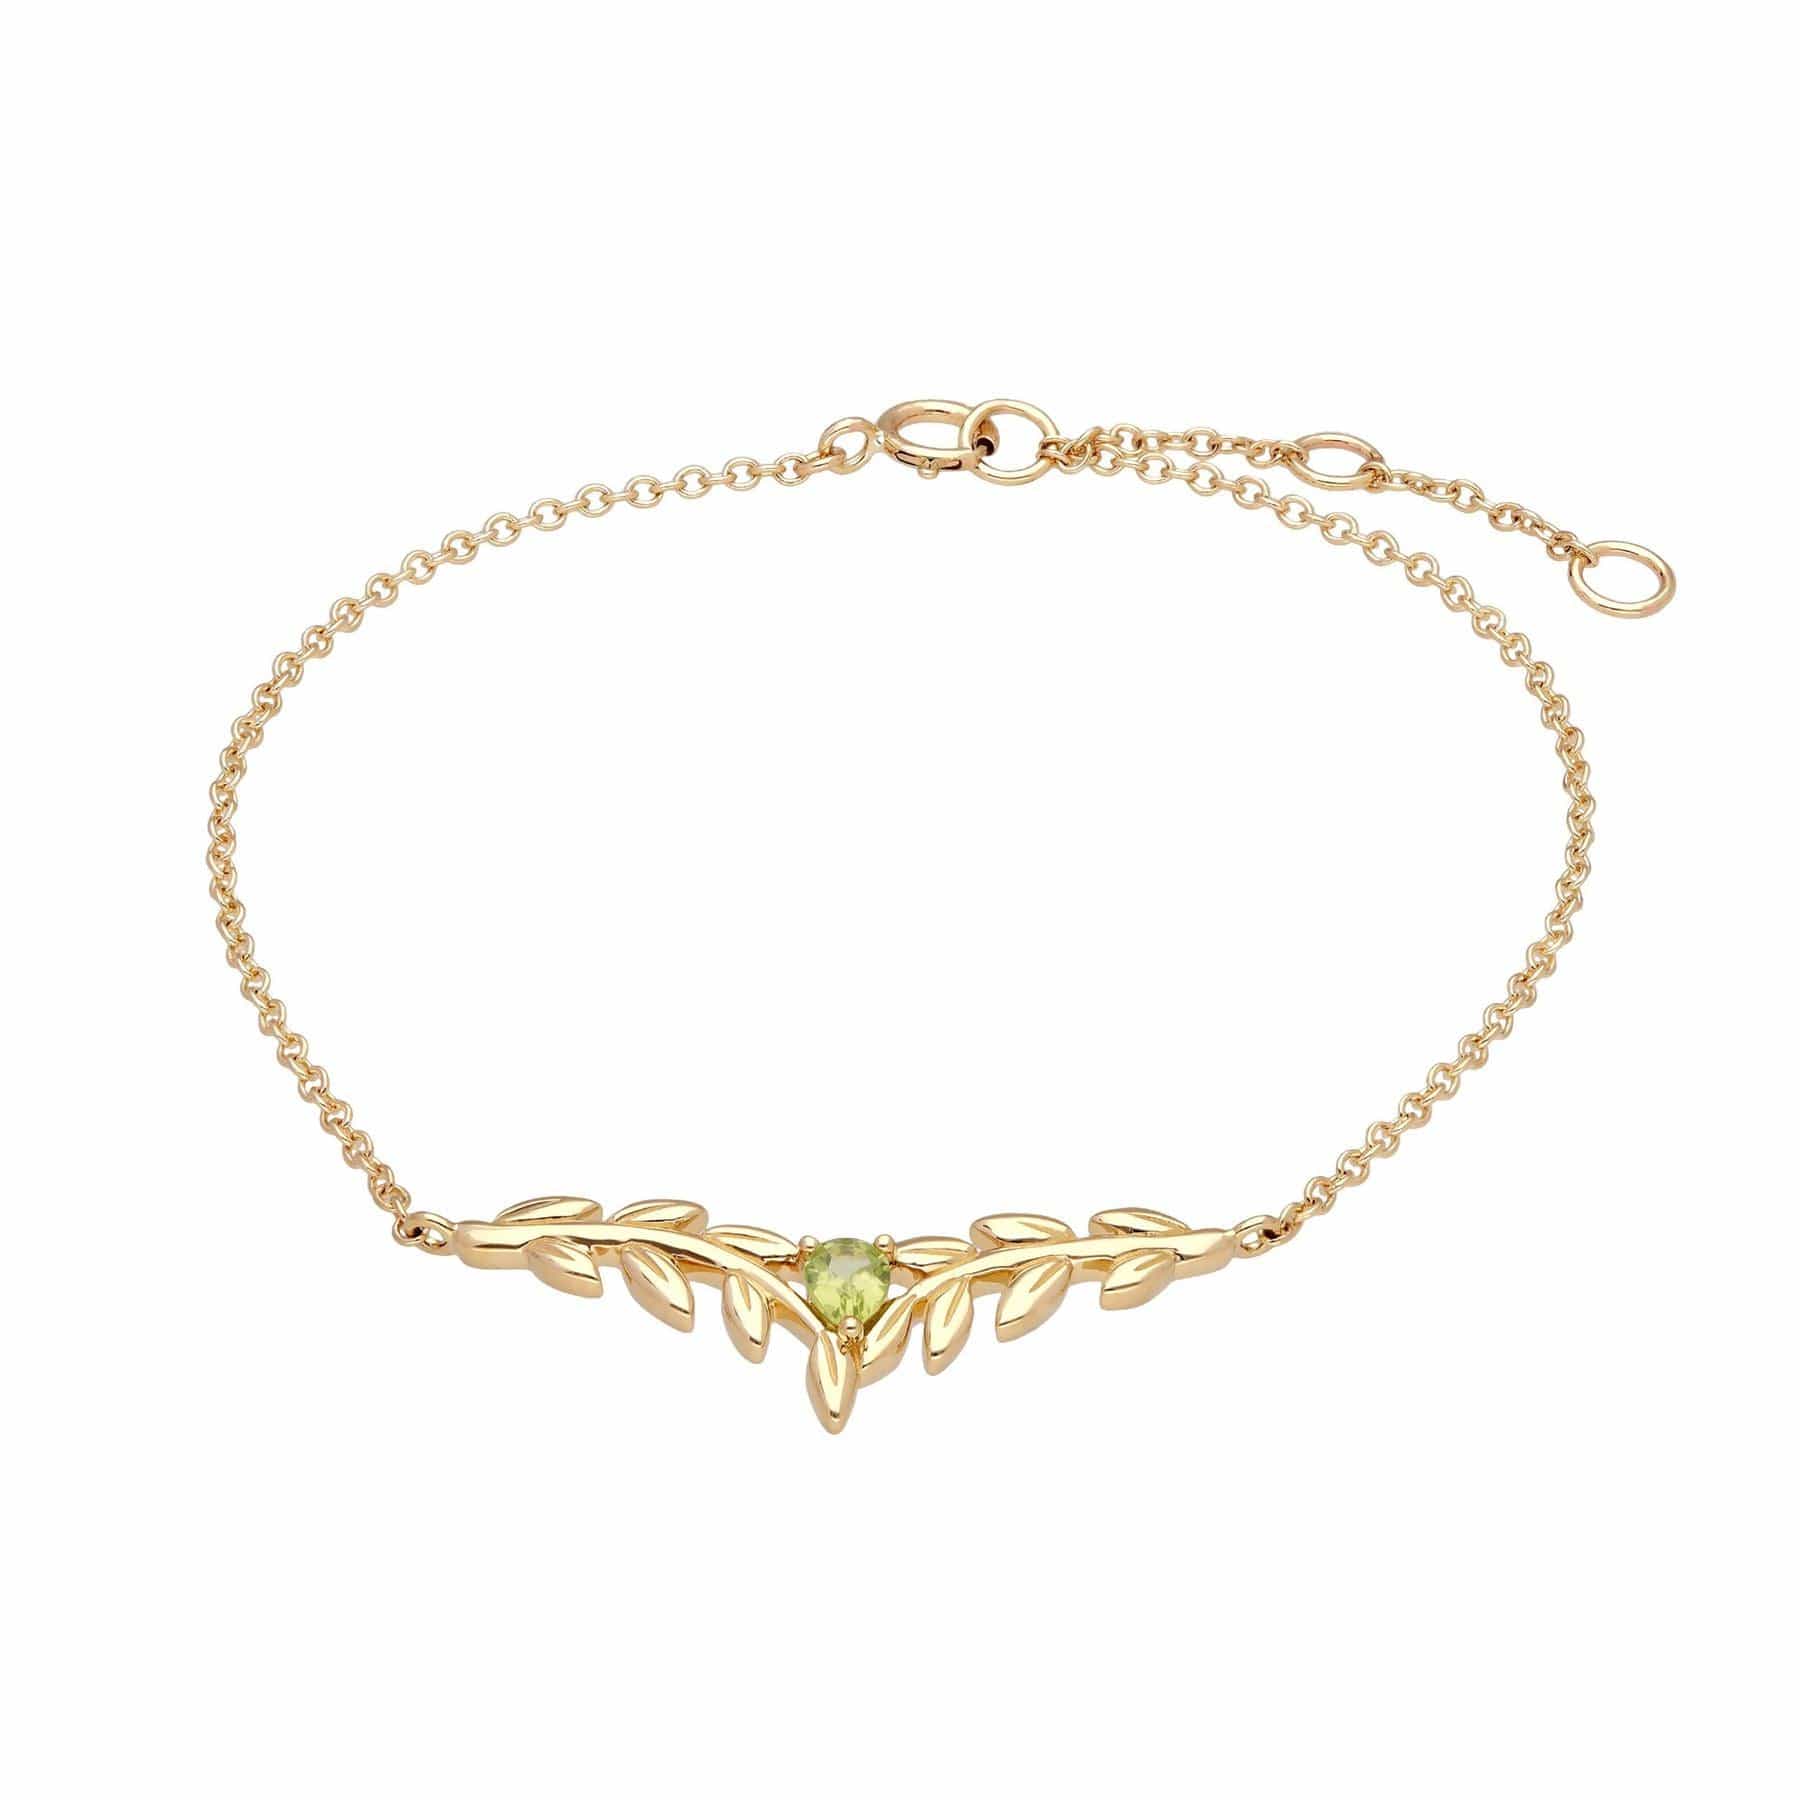 135N0366019-135L0309019 O Leaf Peridot Necklace & Bracelet Set in 9ct Yellow Gold 3